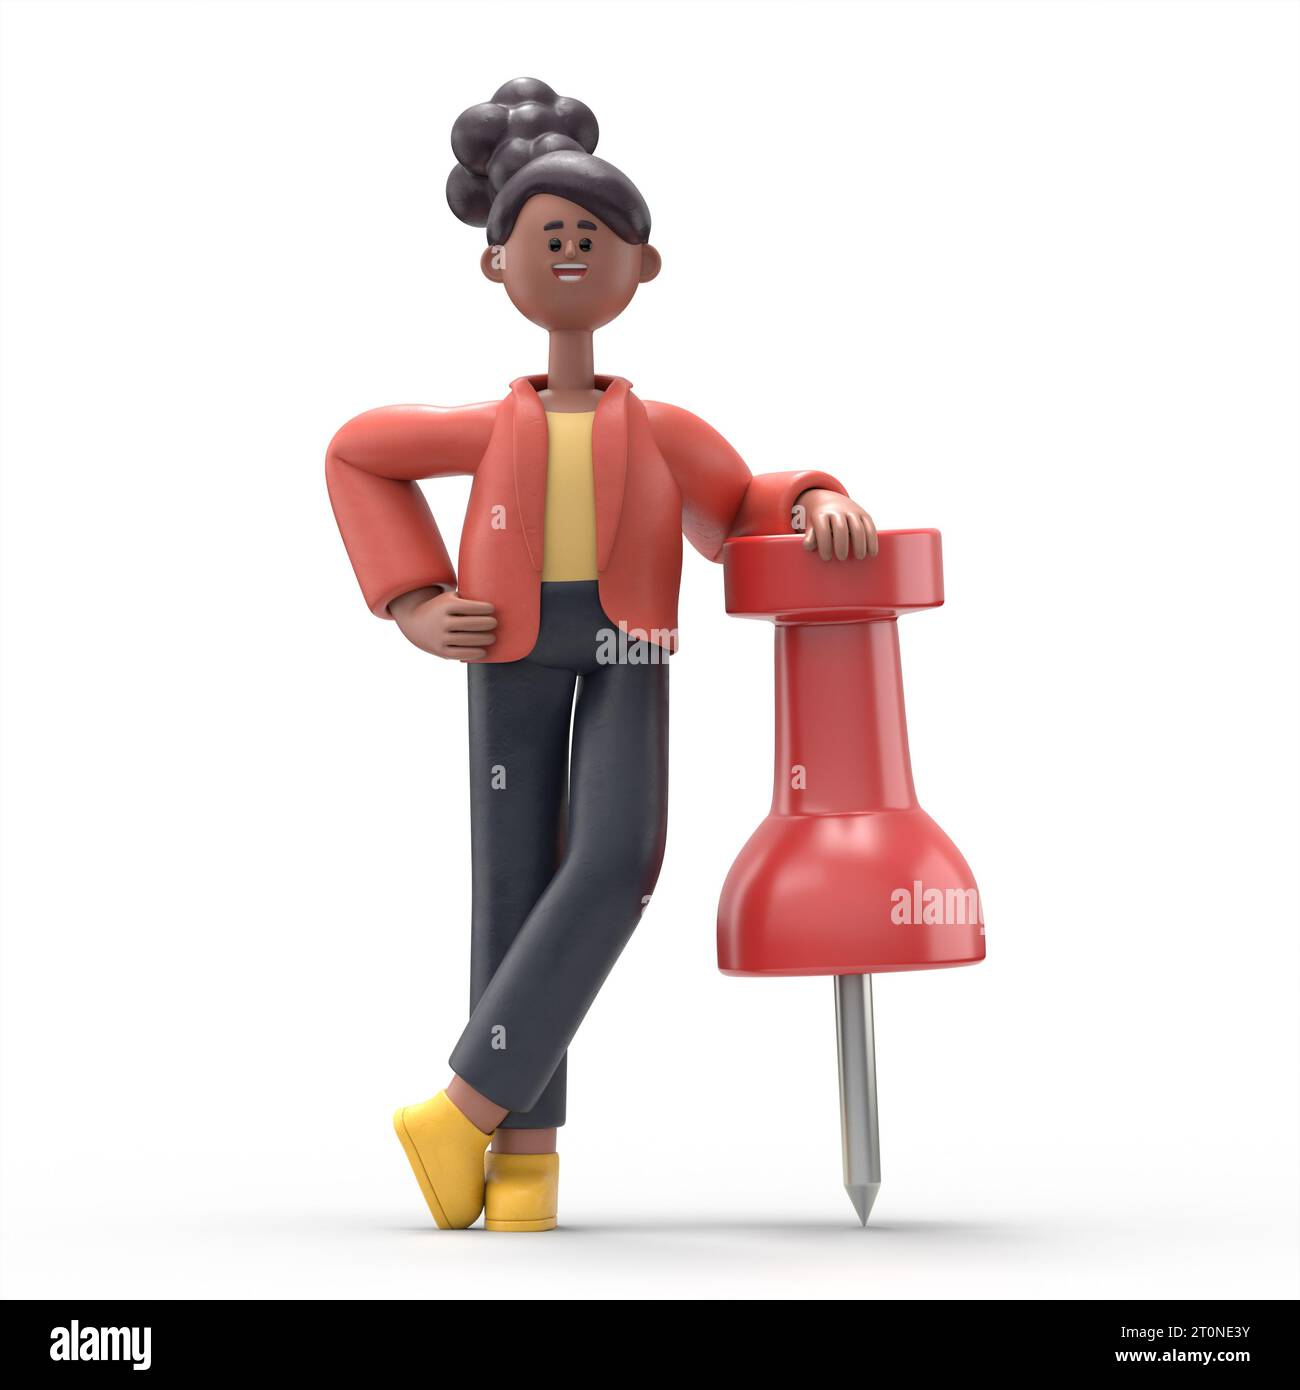 3D illustration of african woman Coco figure with pin needle.3D rendering on white background. Stock Photo